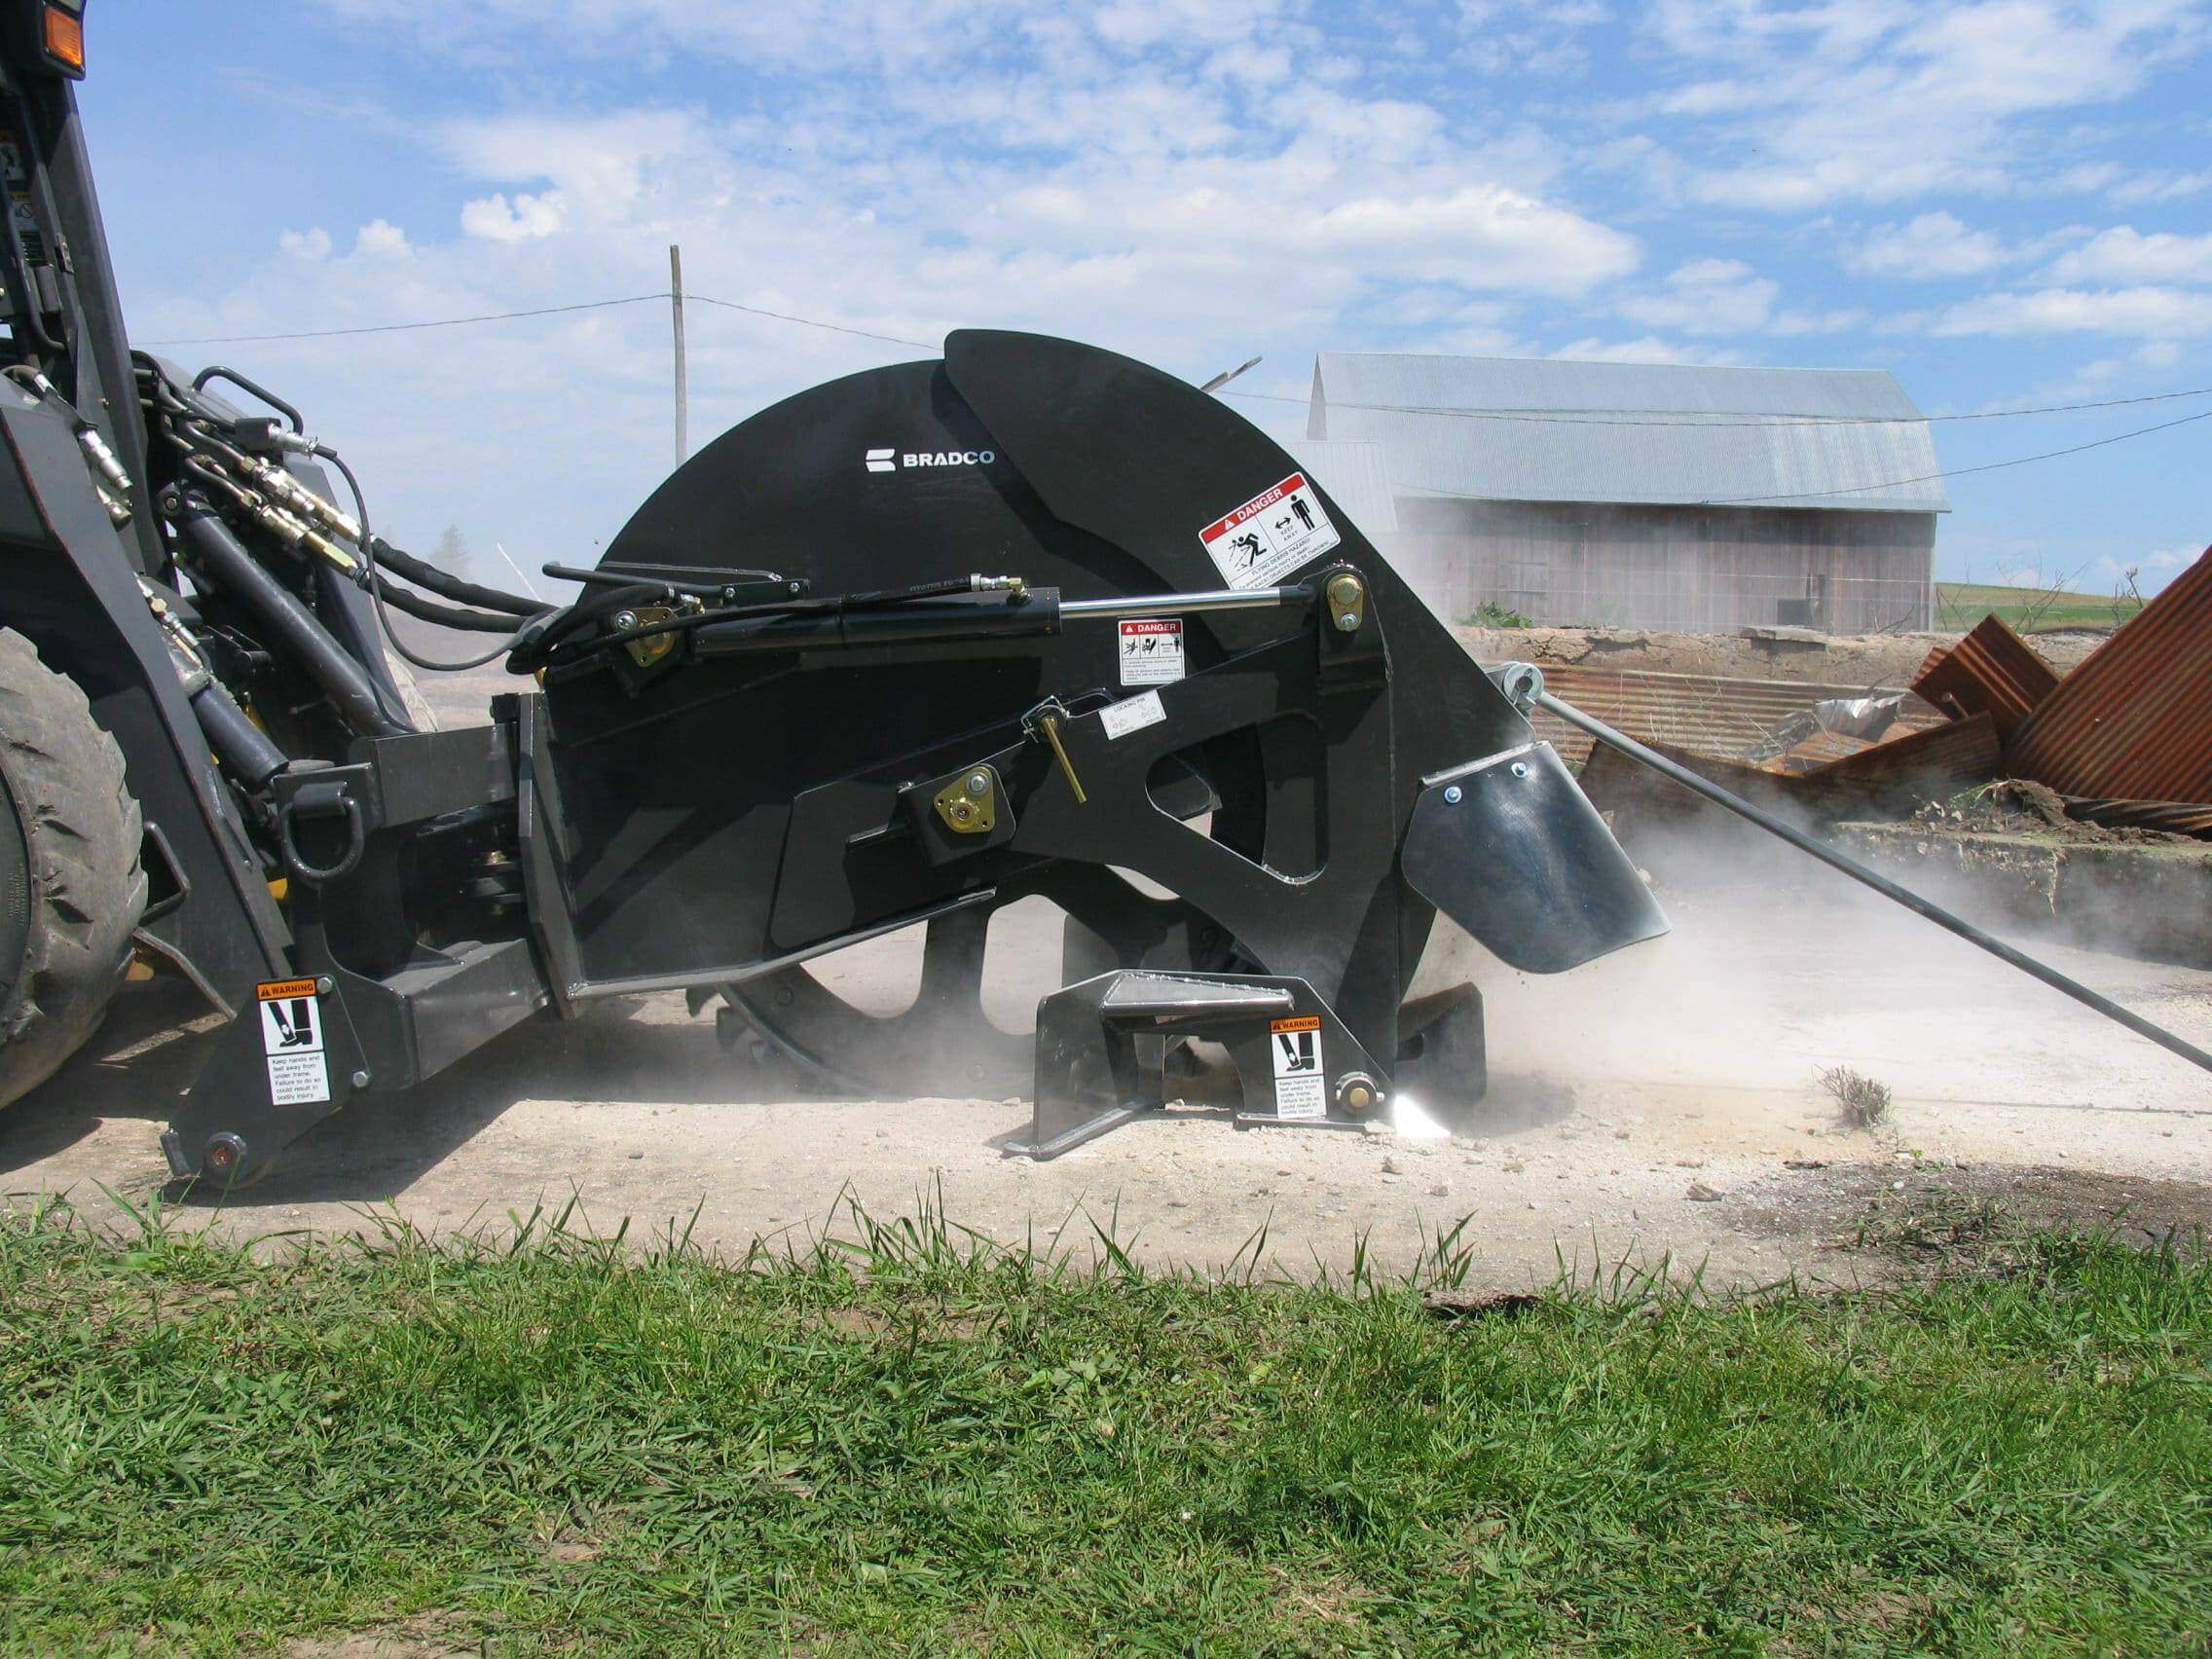 Skid steer rock saw attachments